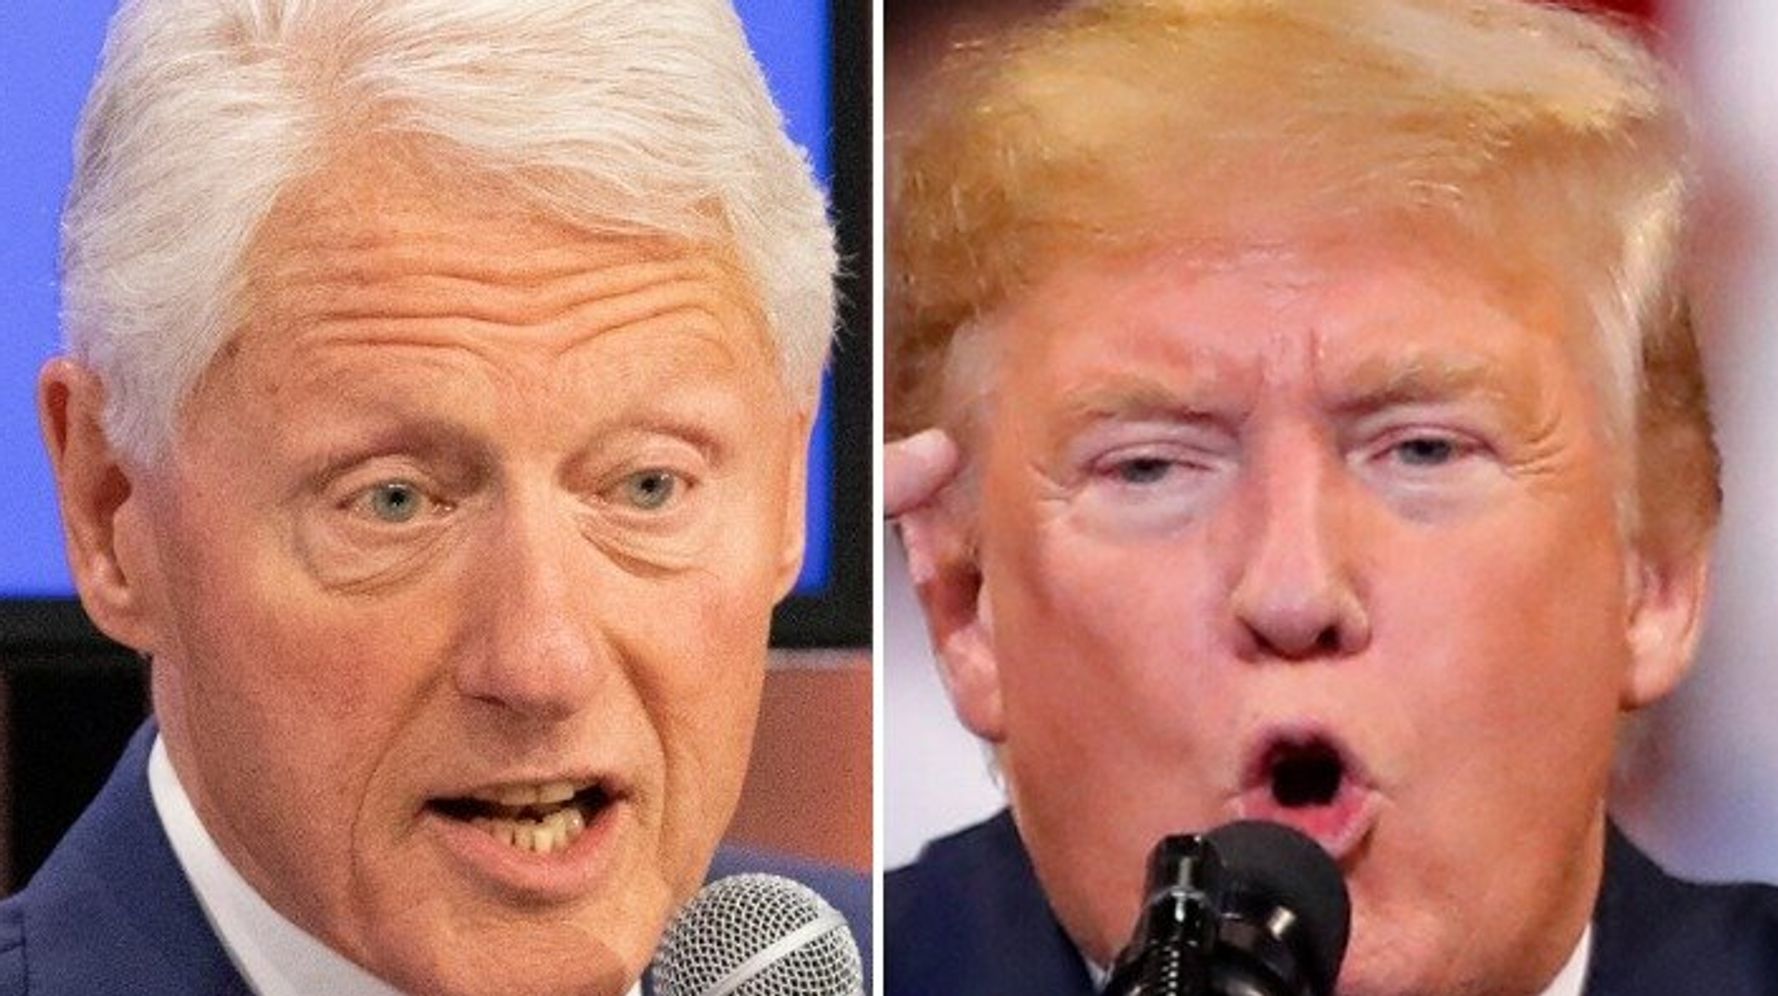 Bill Clinton Takes The Subtlest Of Swings At Donald Trump Over Their Old Golf Photo